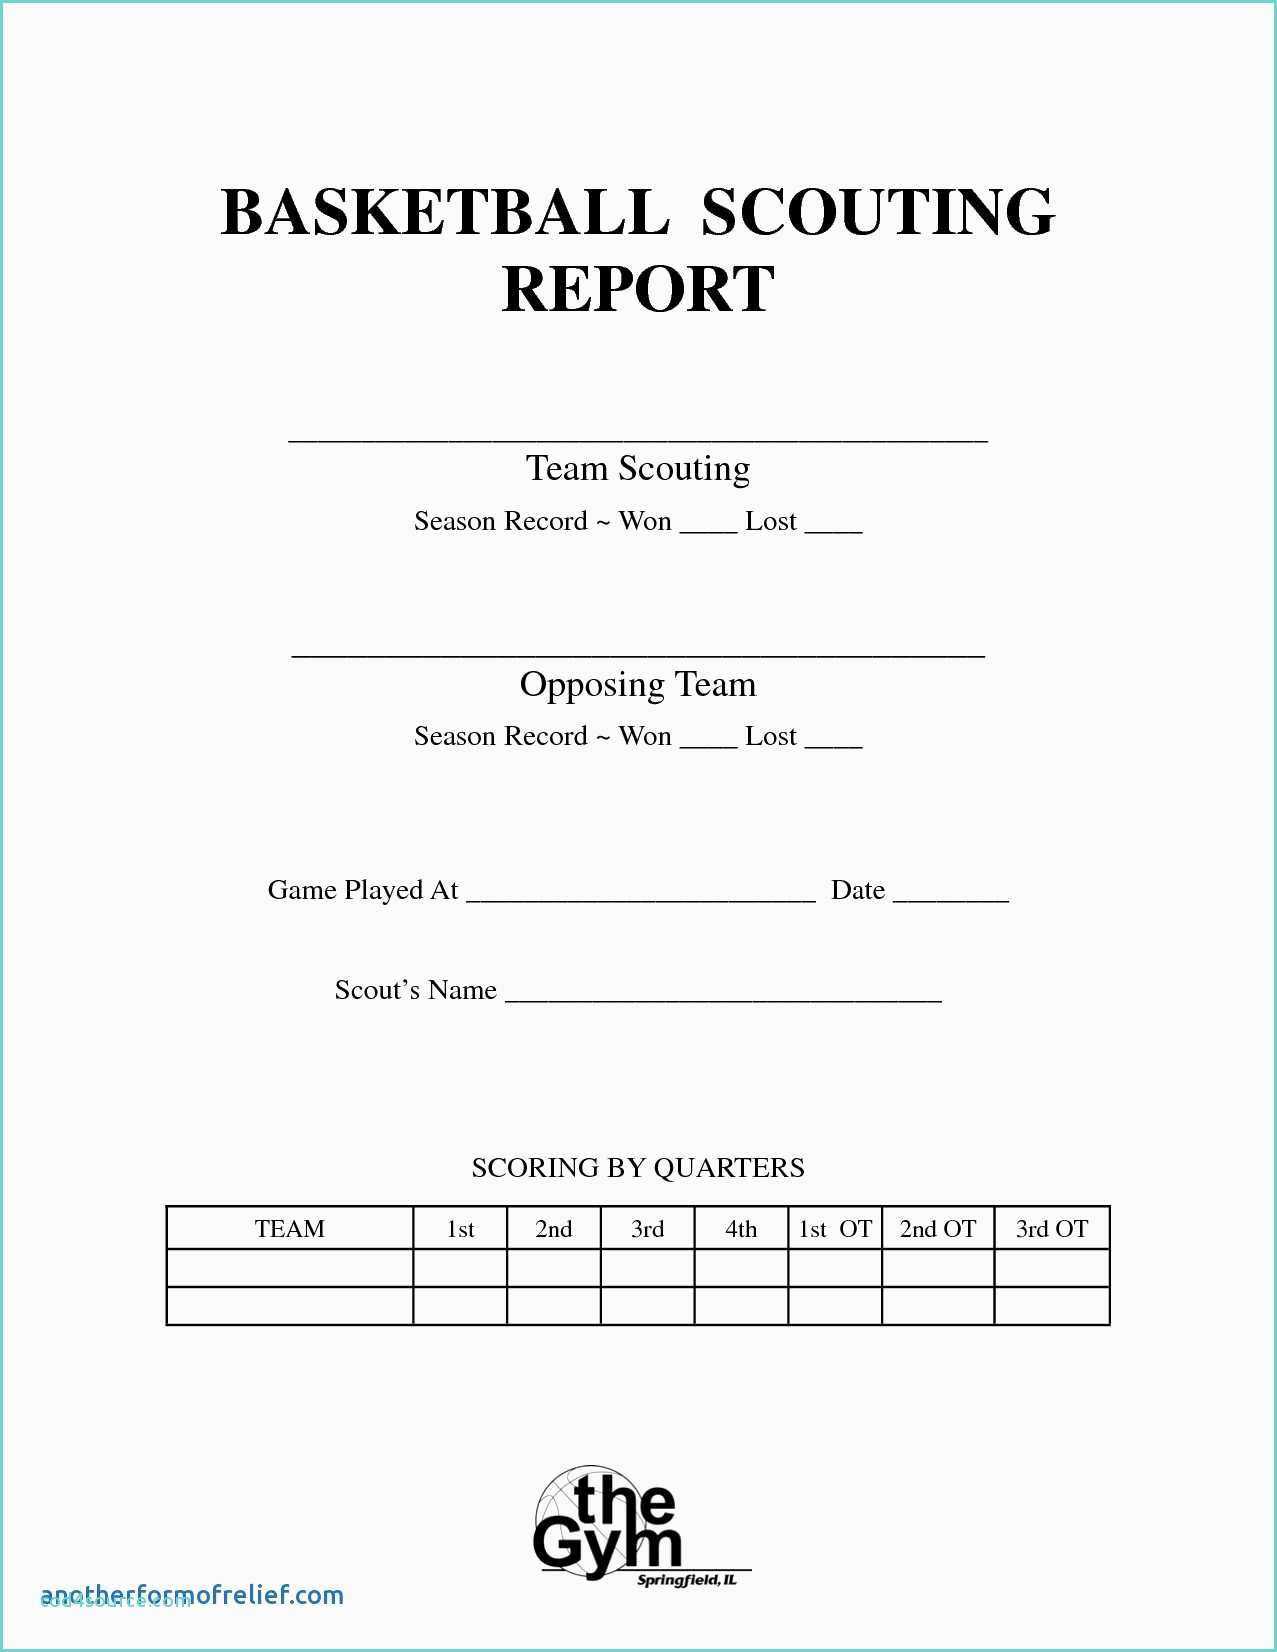 Boy Scout Tracking Spreadsheet Of Basketball Scouting Report For Scouting Report Basketball Template